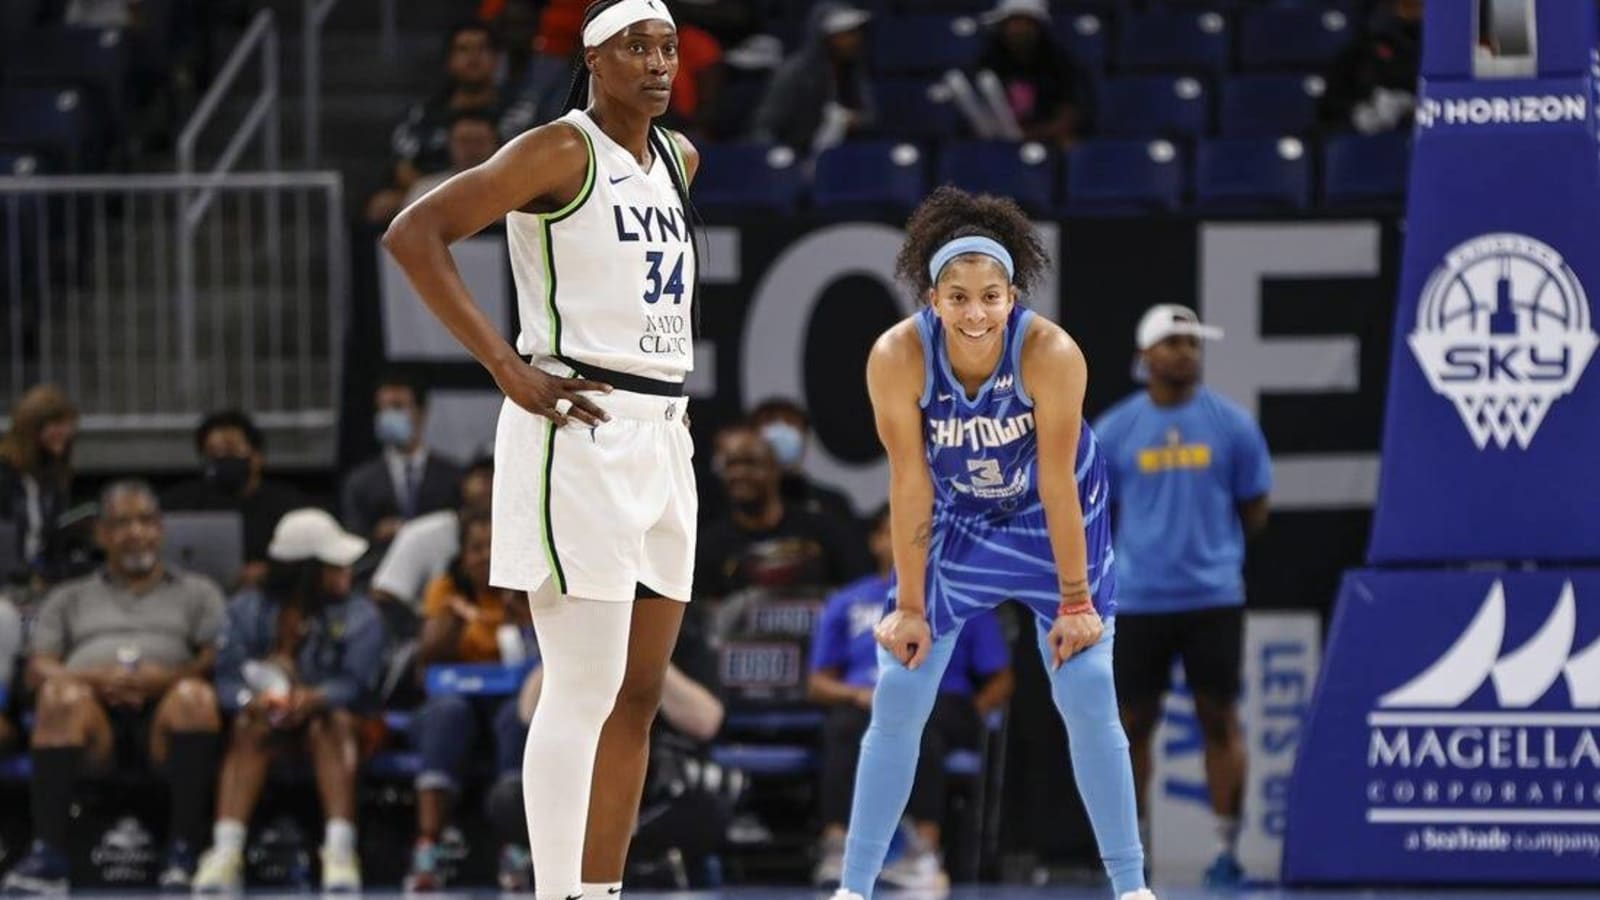 Playoffs at stake as Sylvia Fowles and Lynx visit Sun